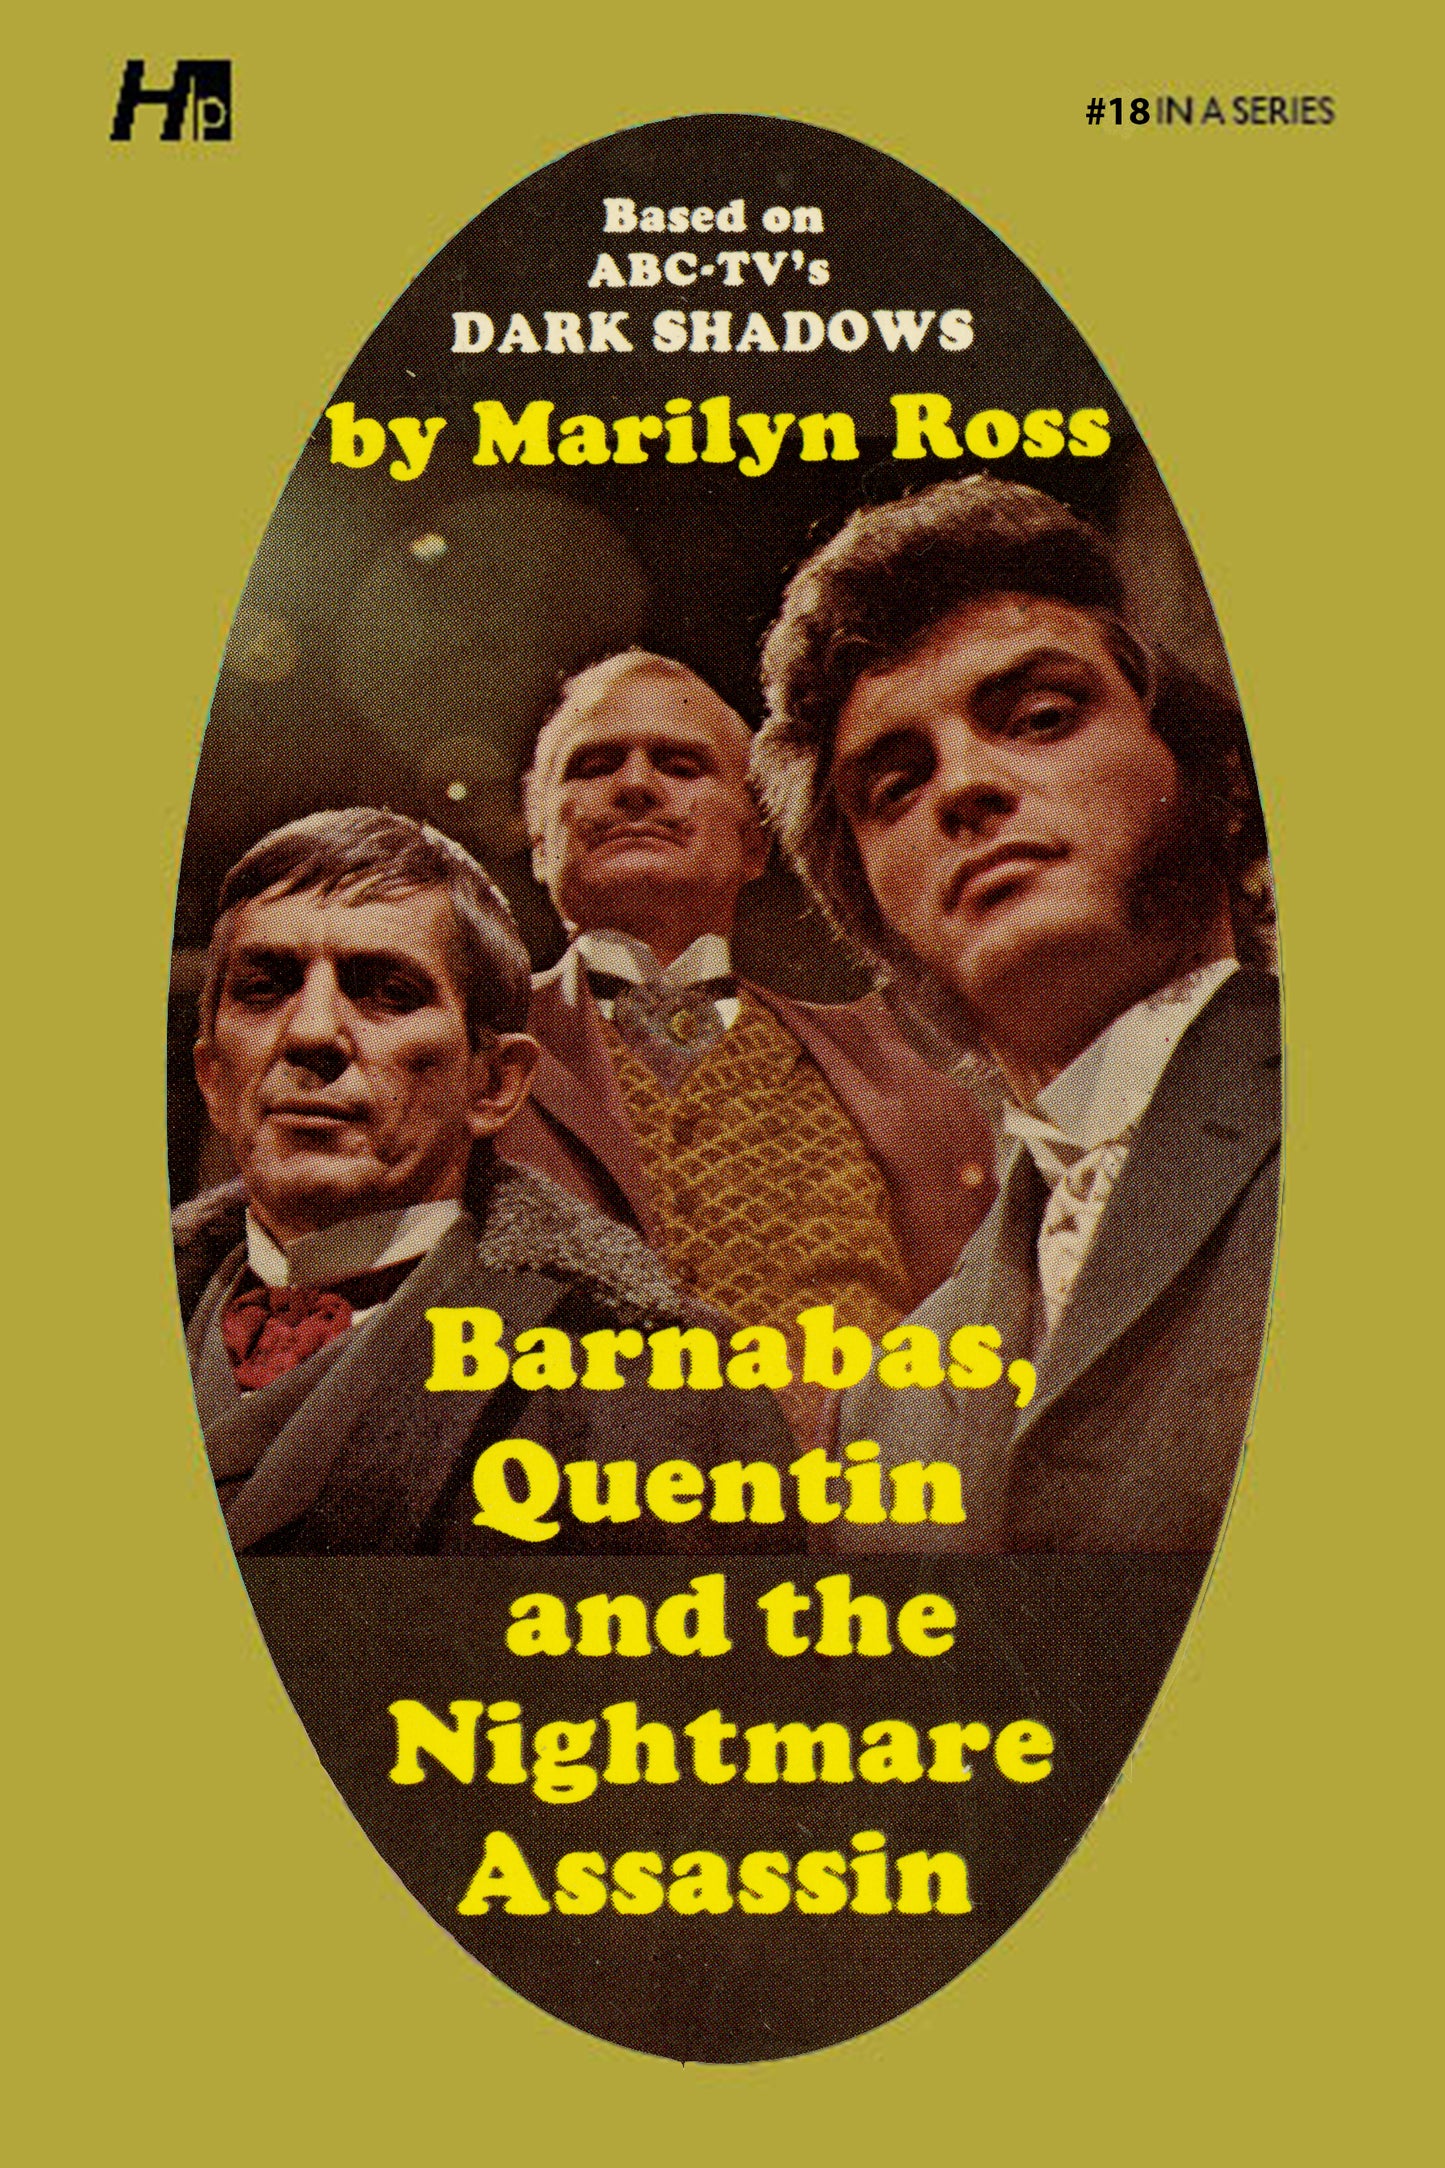 Dark Shadows #18: Barnabas Collins and the Nightmare Assassin [Paperback]